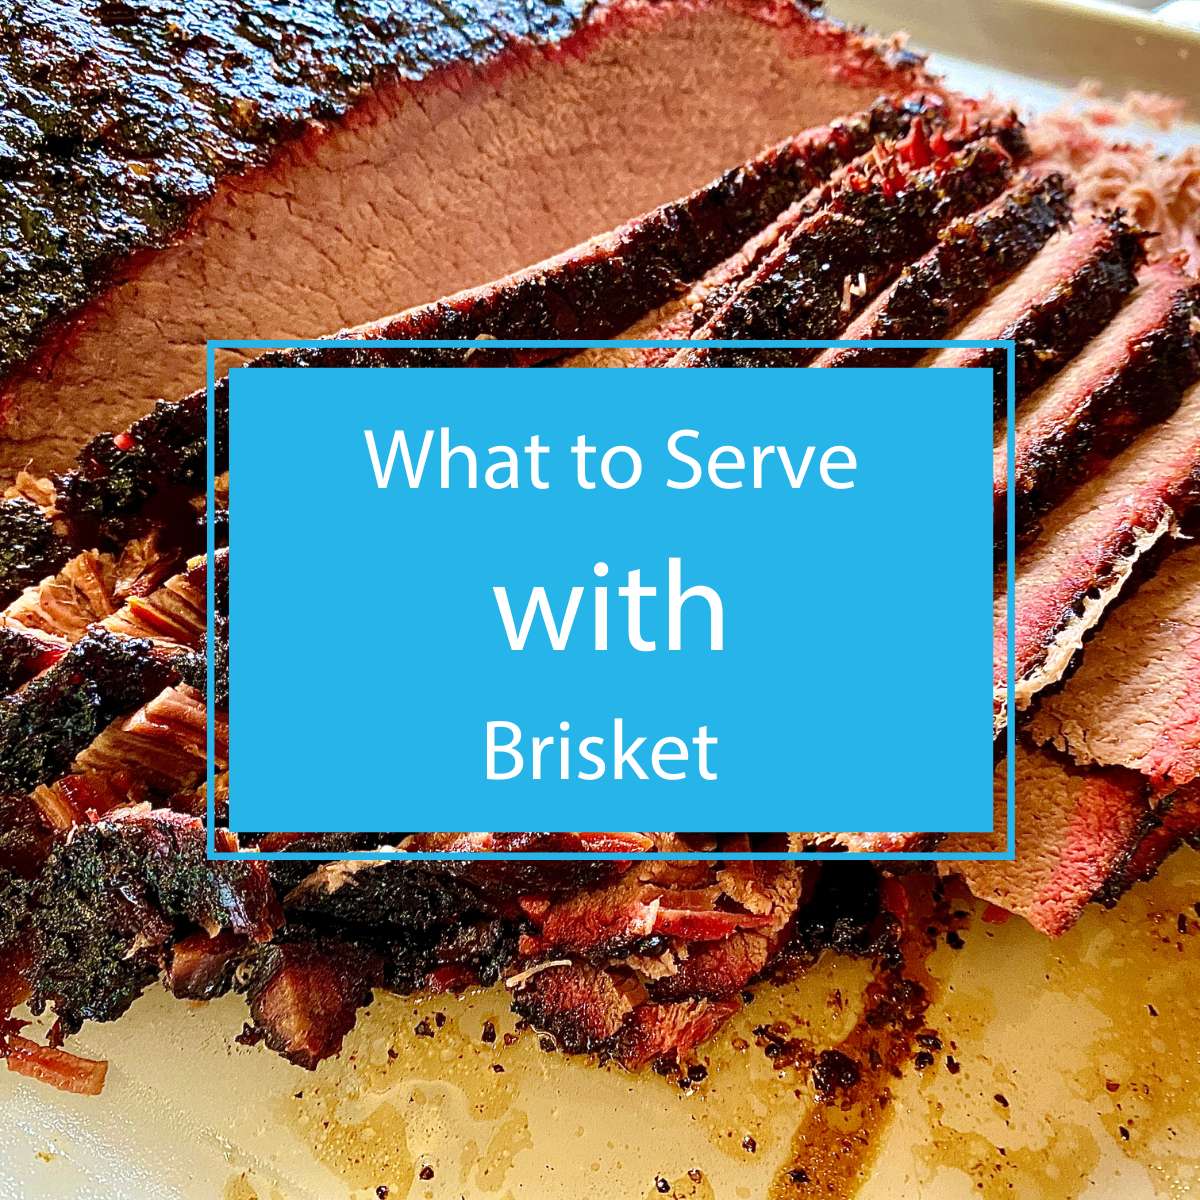 What to Serve with Brisket